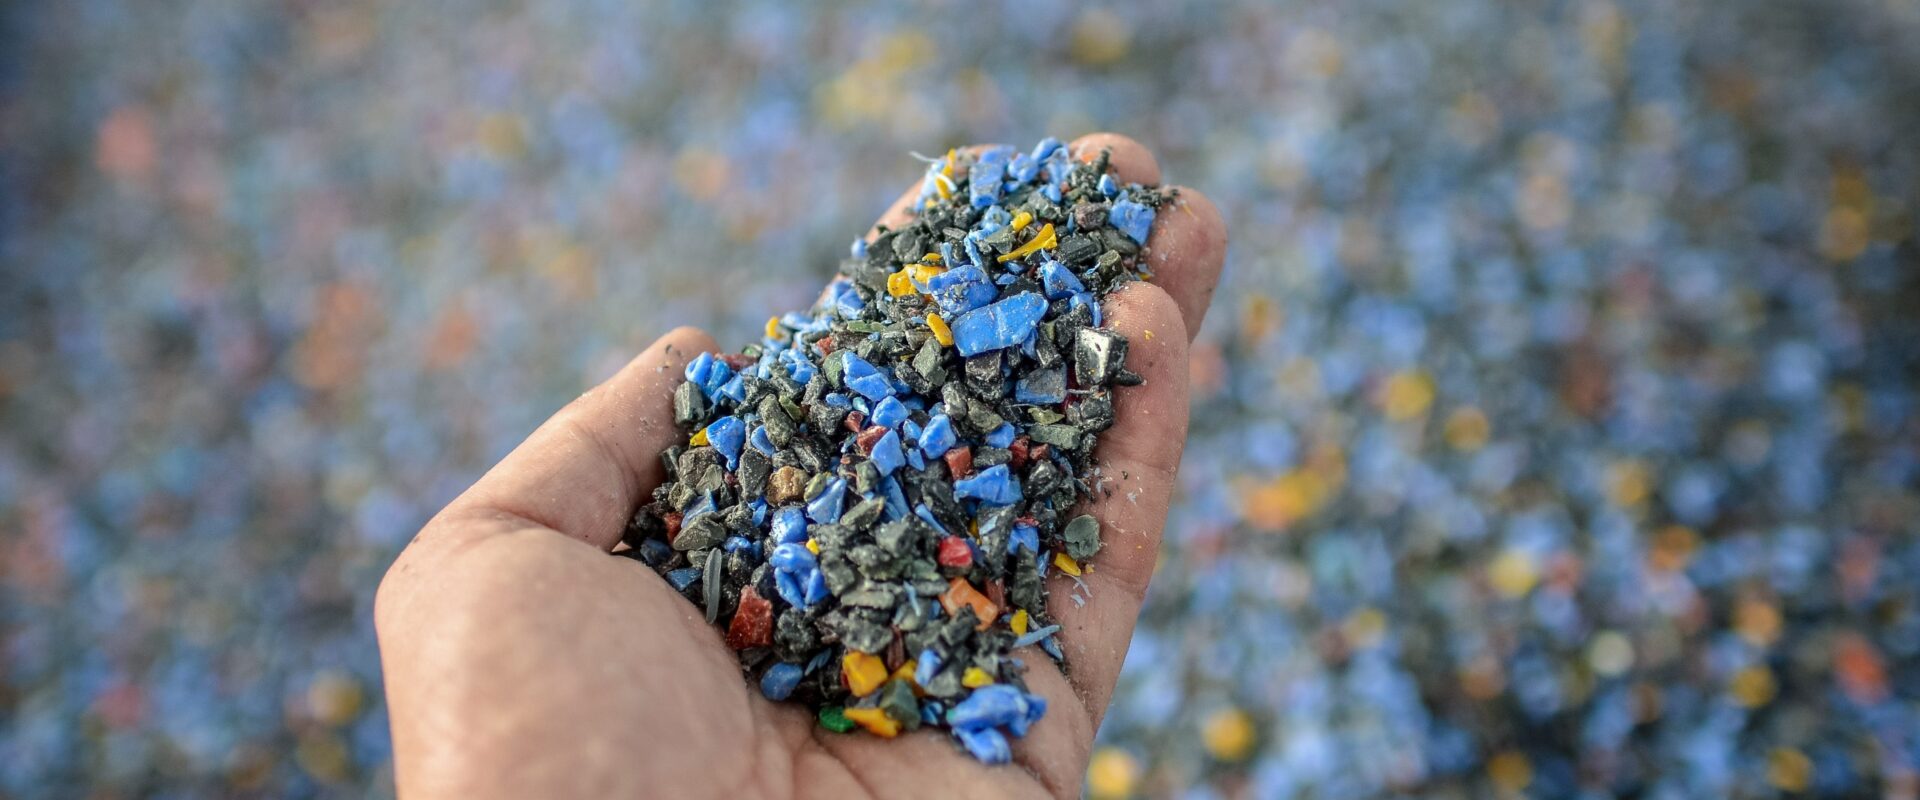 Hand holding recycled plastic chips as raw material in production.